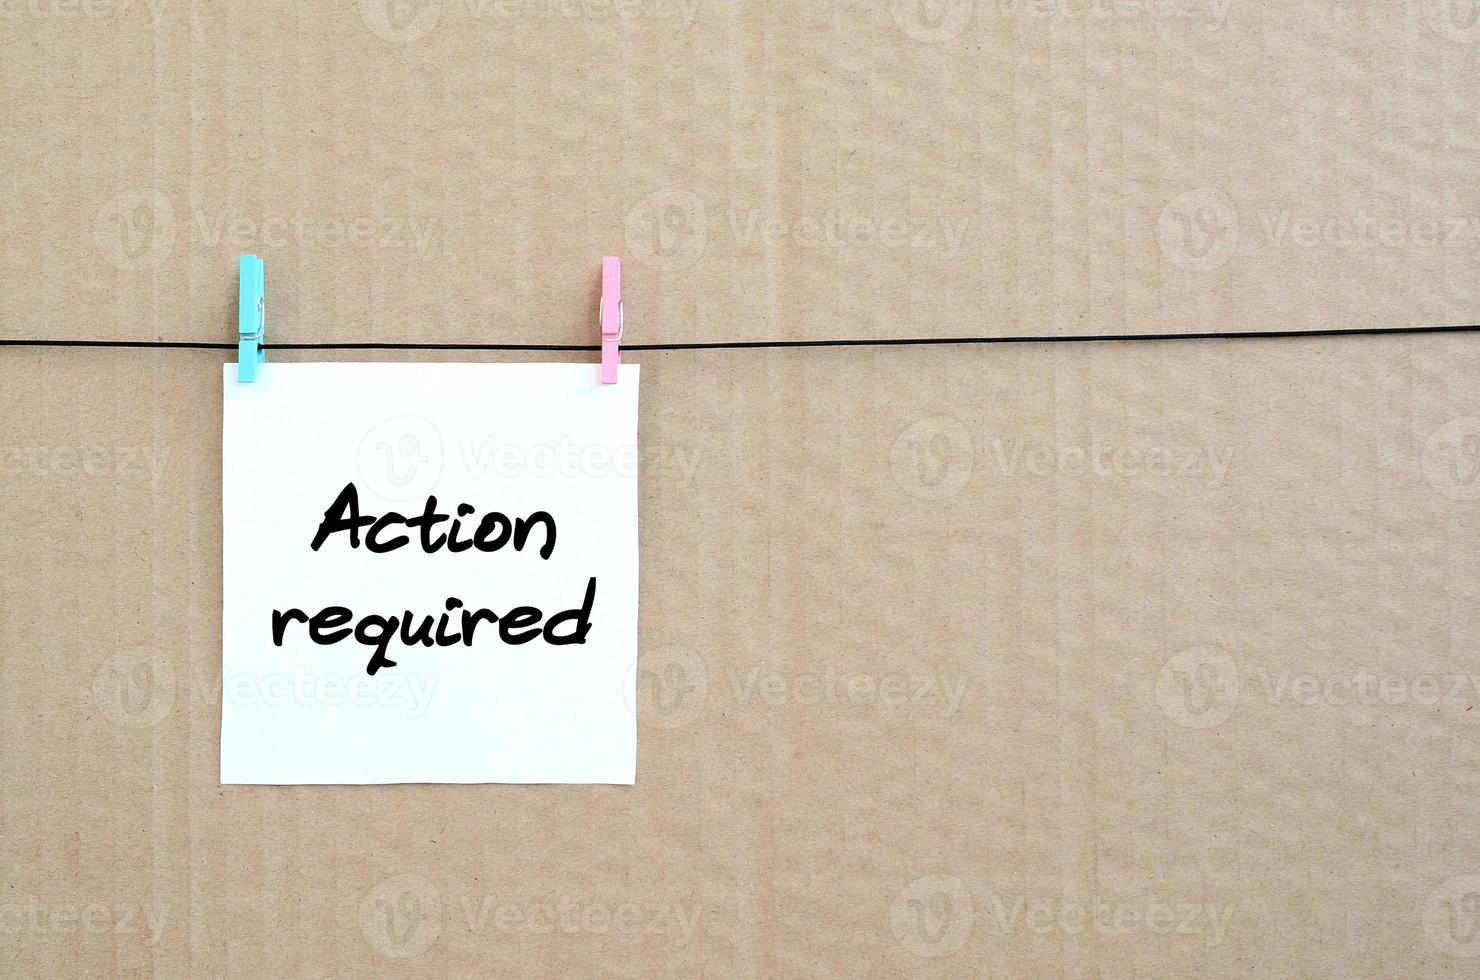 Action required Note is written on a white sticker that hangs with a clothespin on a rope on a background of brown cardboard photo